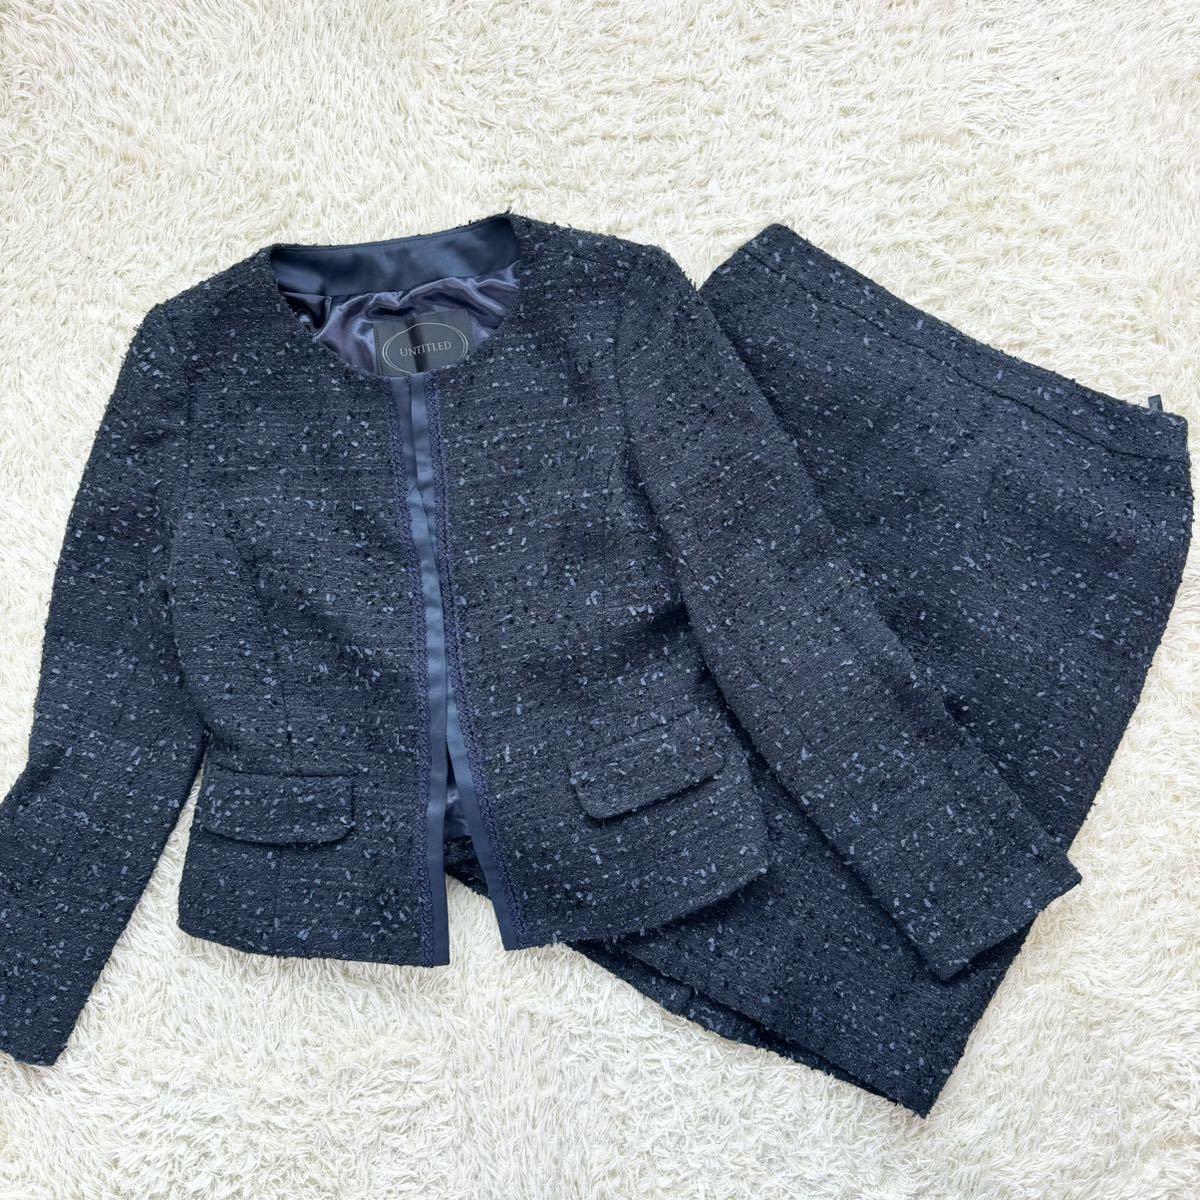 [ ultimate beautiful goods ] Untitled setup no color skirt suit top and bottom formal mama suit through year L size tweed navy navy blue color lame 